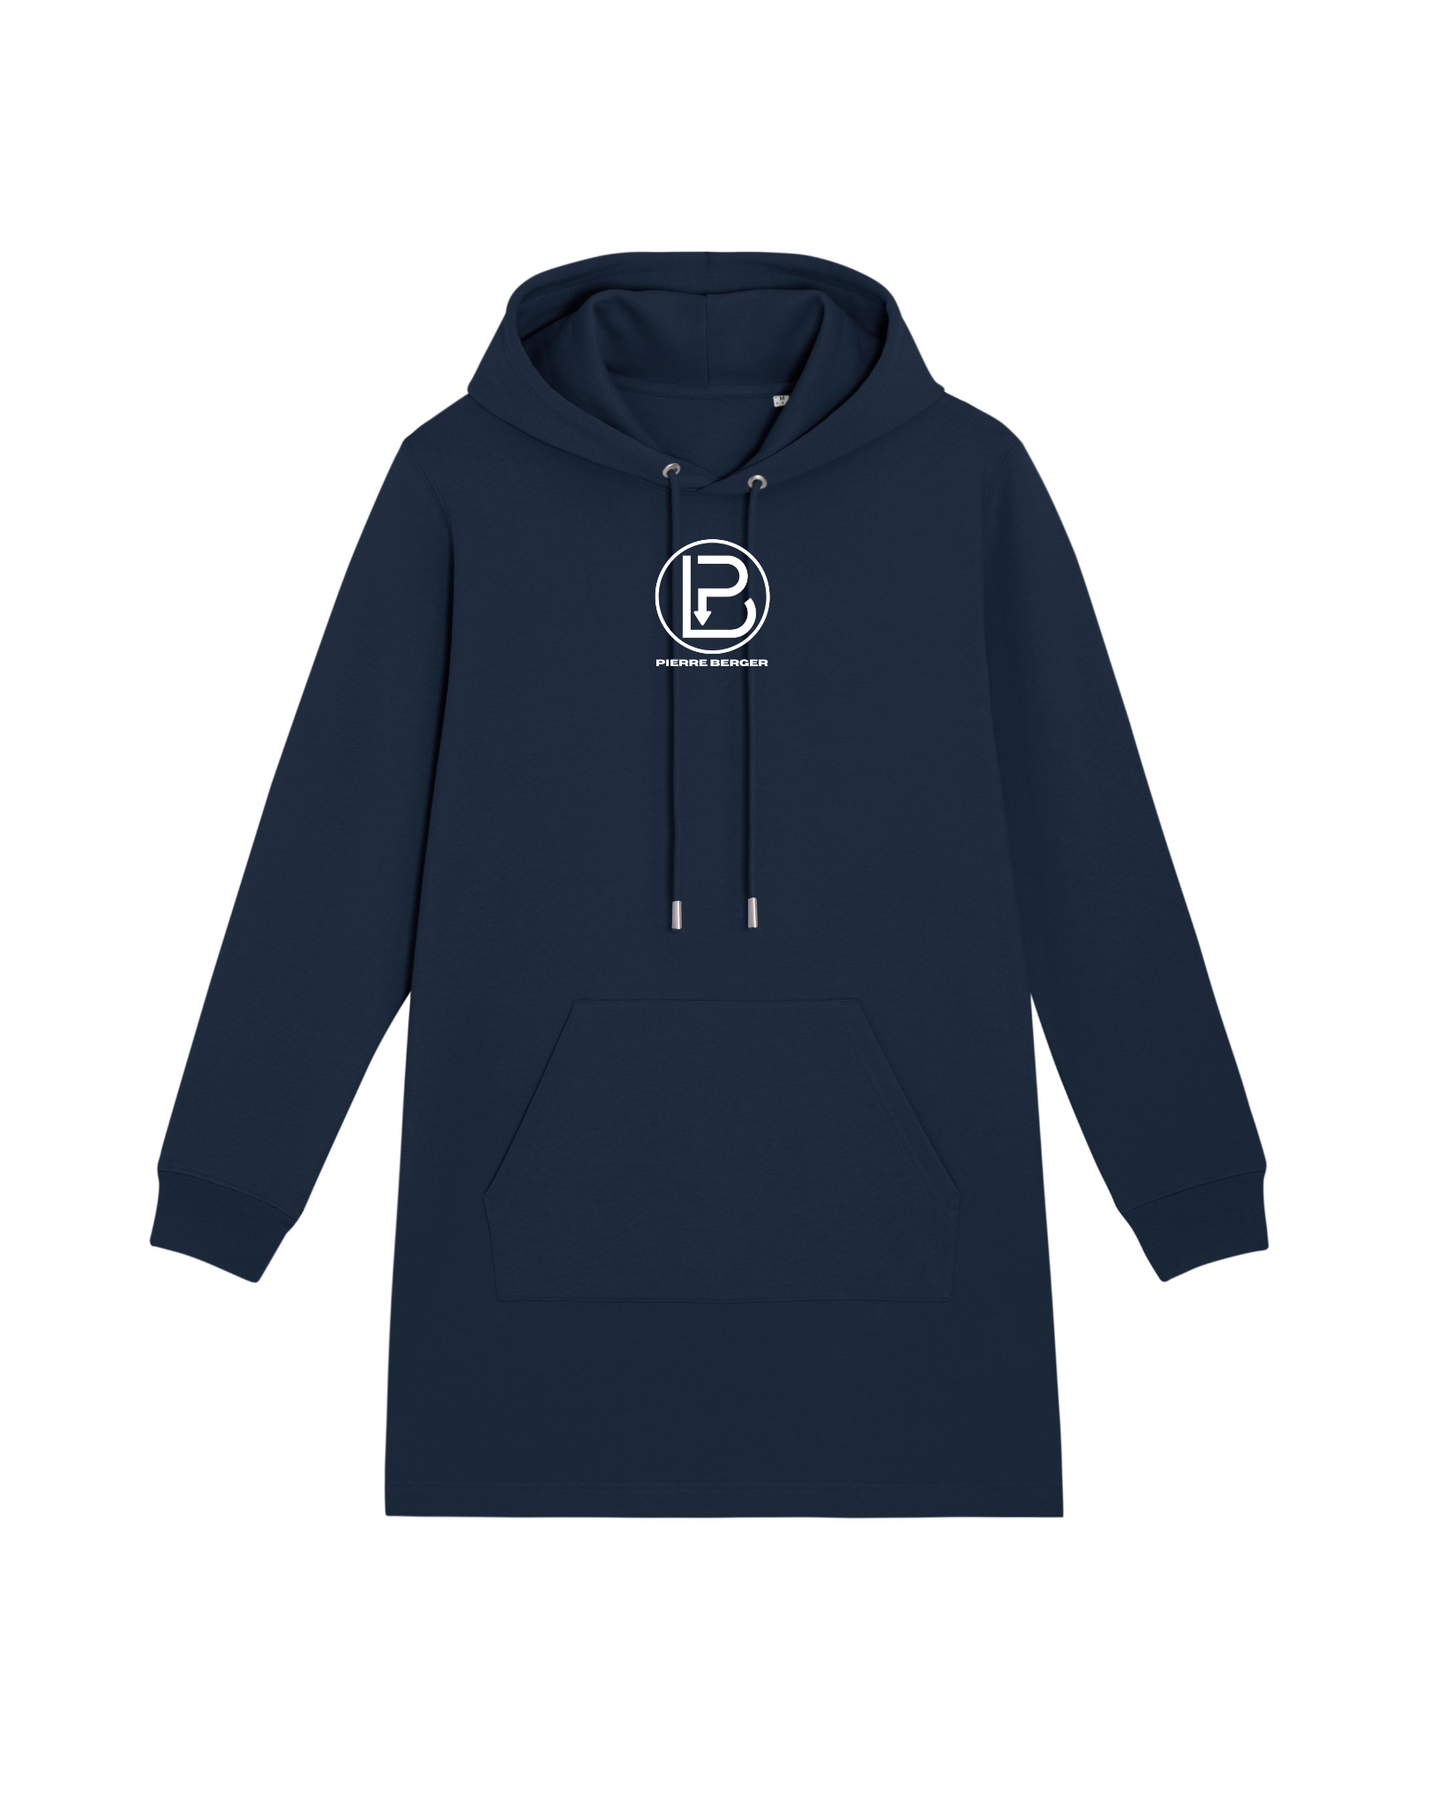 PIERRE BERGER - Hooded sweatshirt dress 100% recycled embroidery